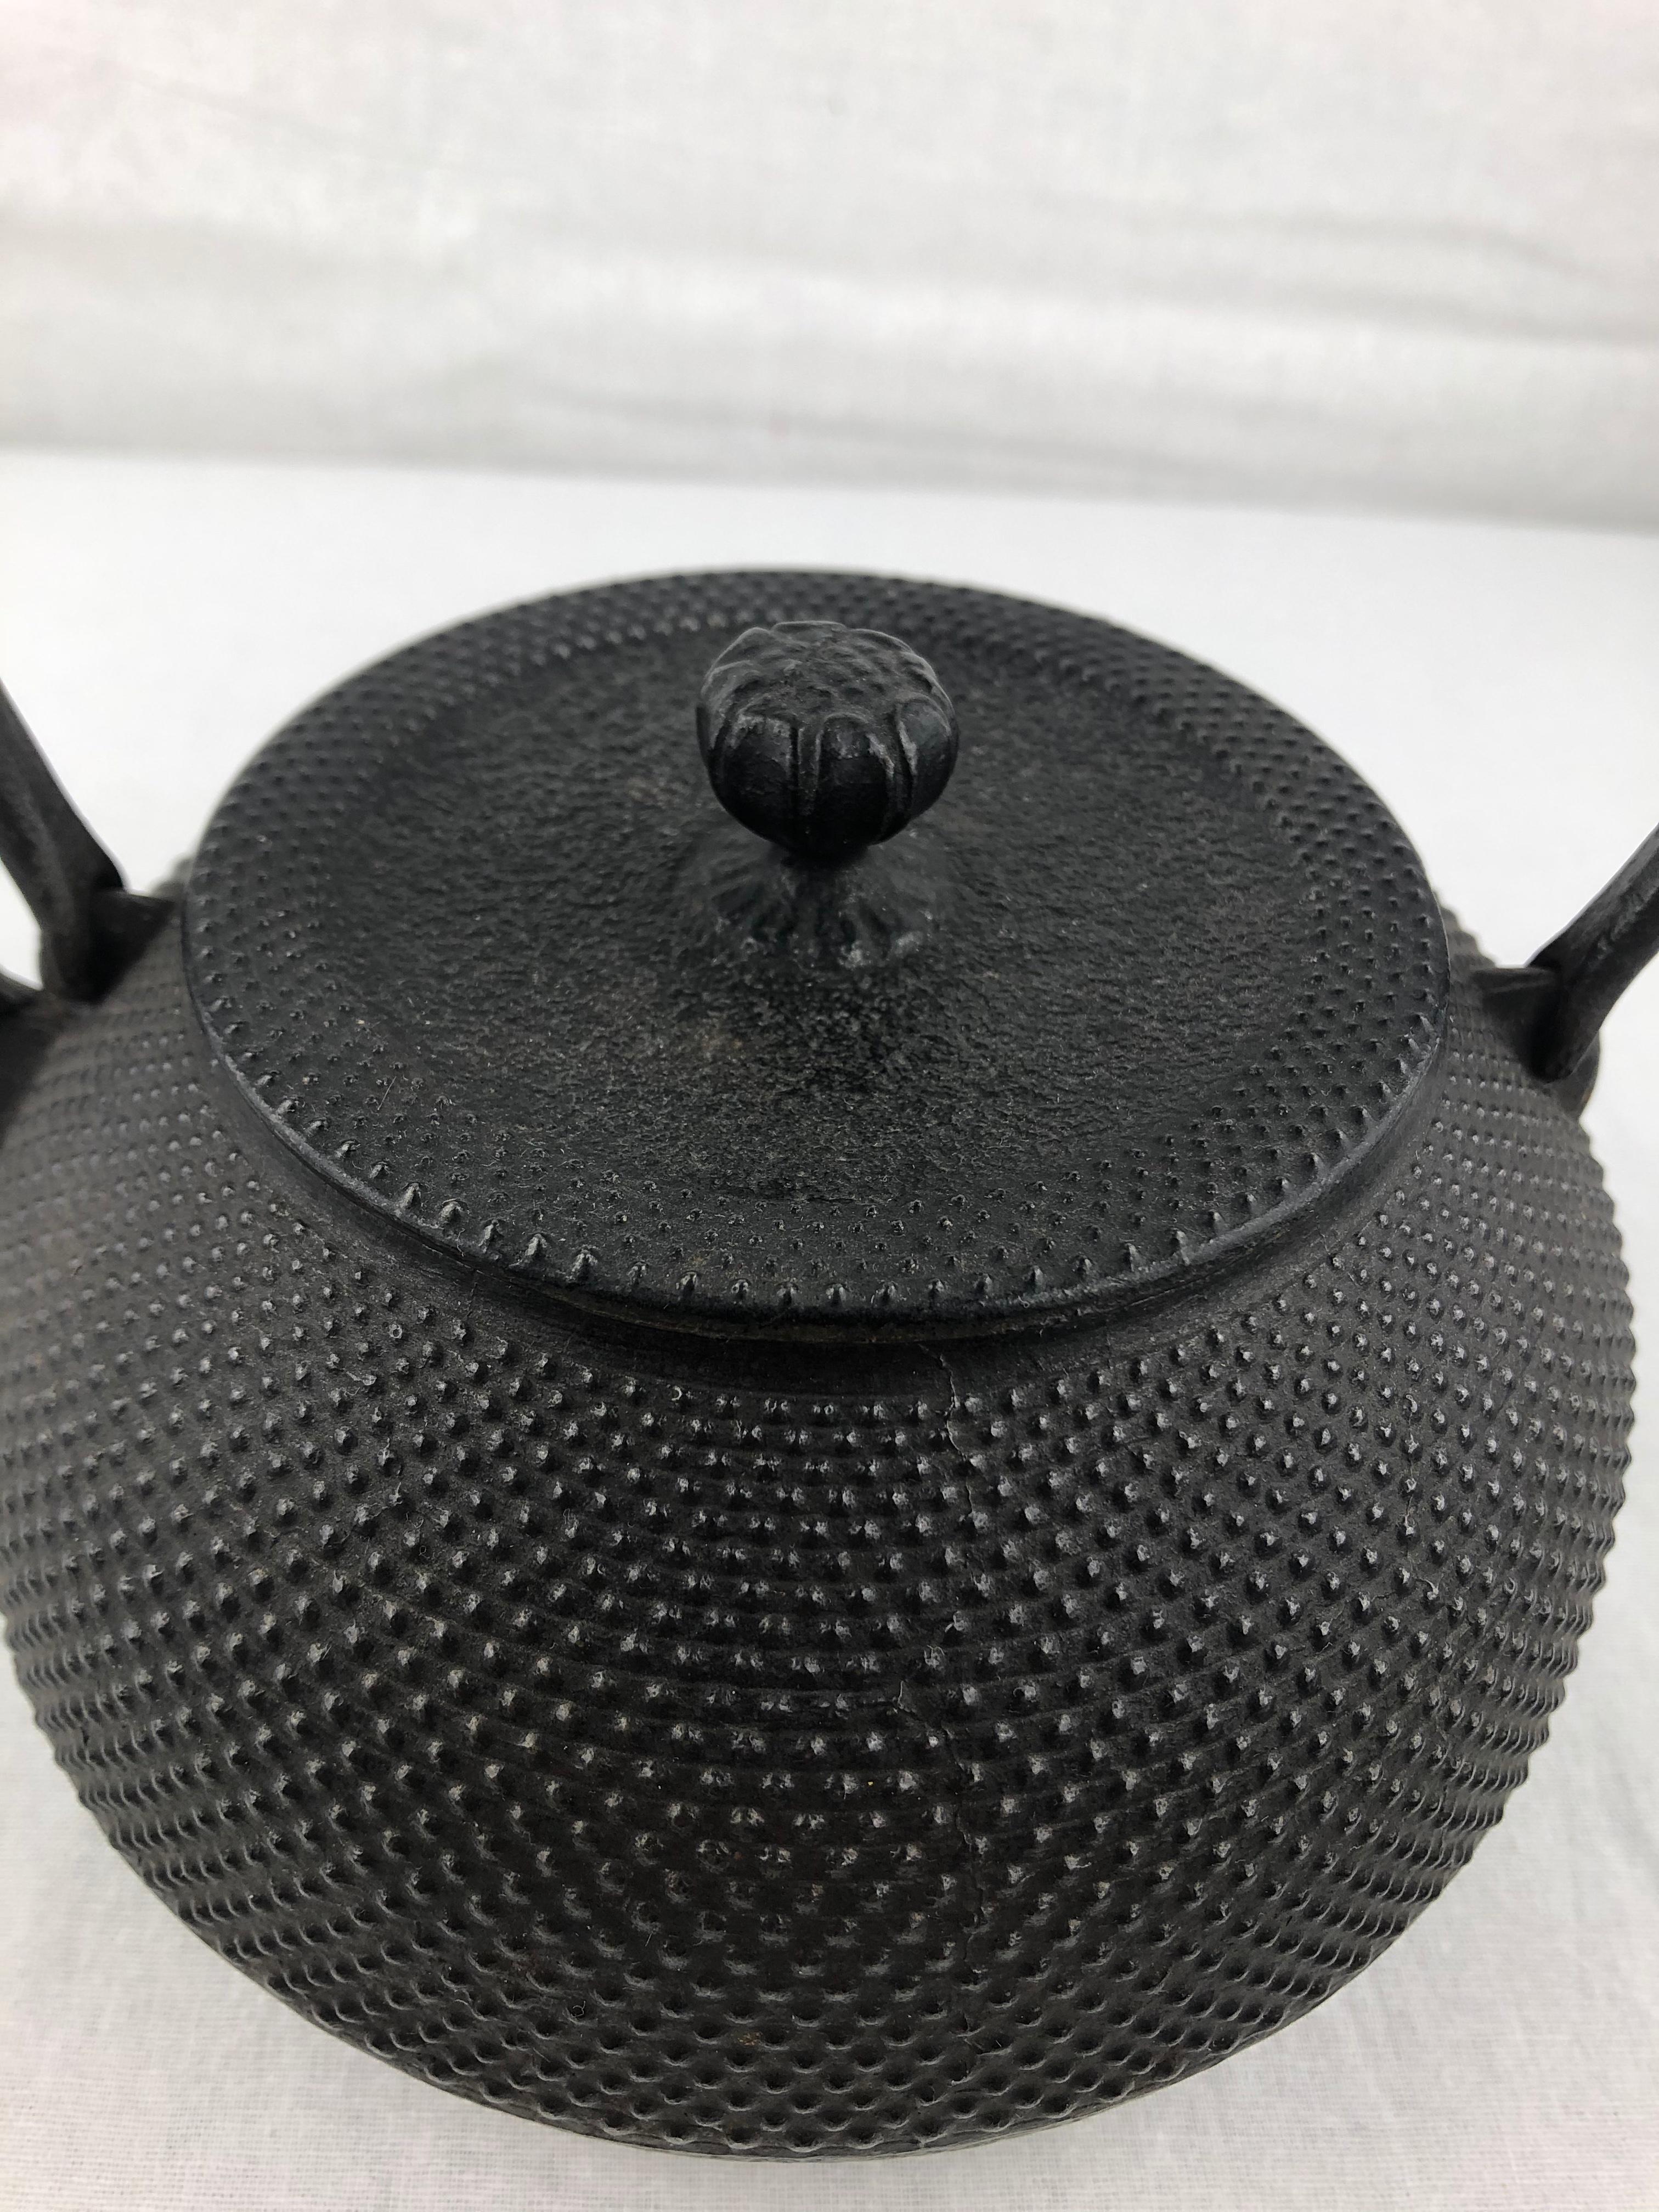 Vintage Tetsubin Japanese iron kettle in perfect antique condition. It would make a great display piece or could be put to immediate use. Strong and sturdy this piece has no fractures or leaks but has a very visually appealing amount of natural